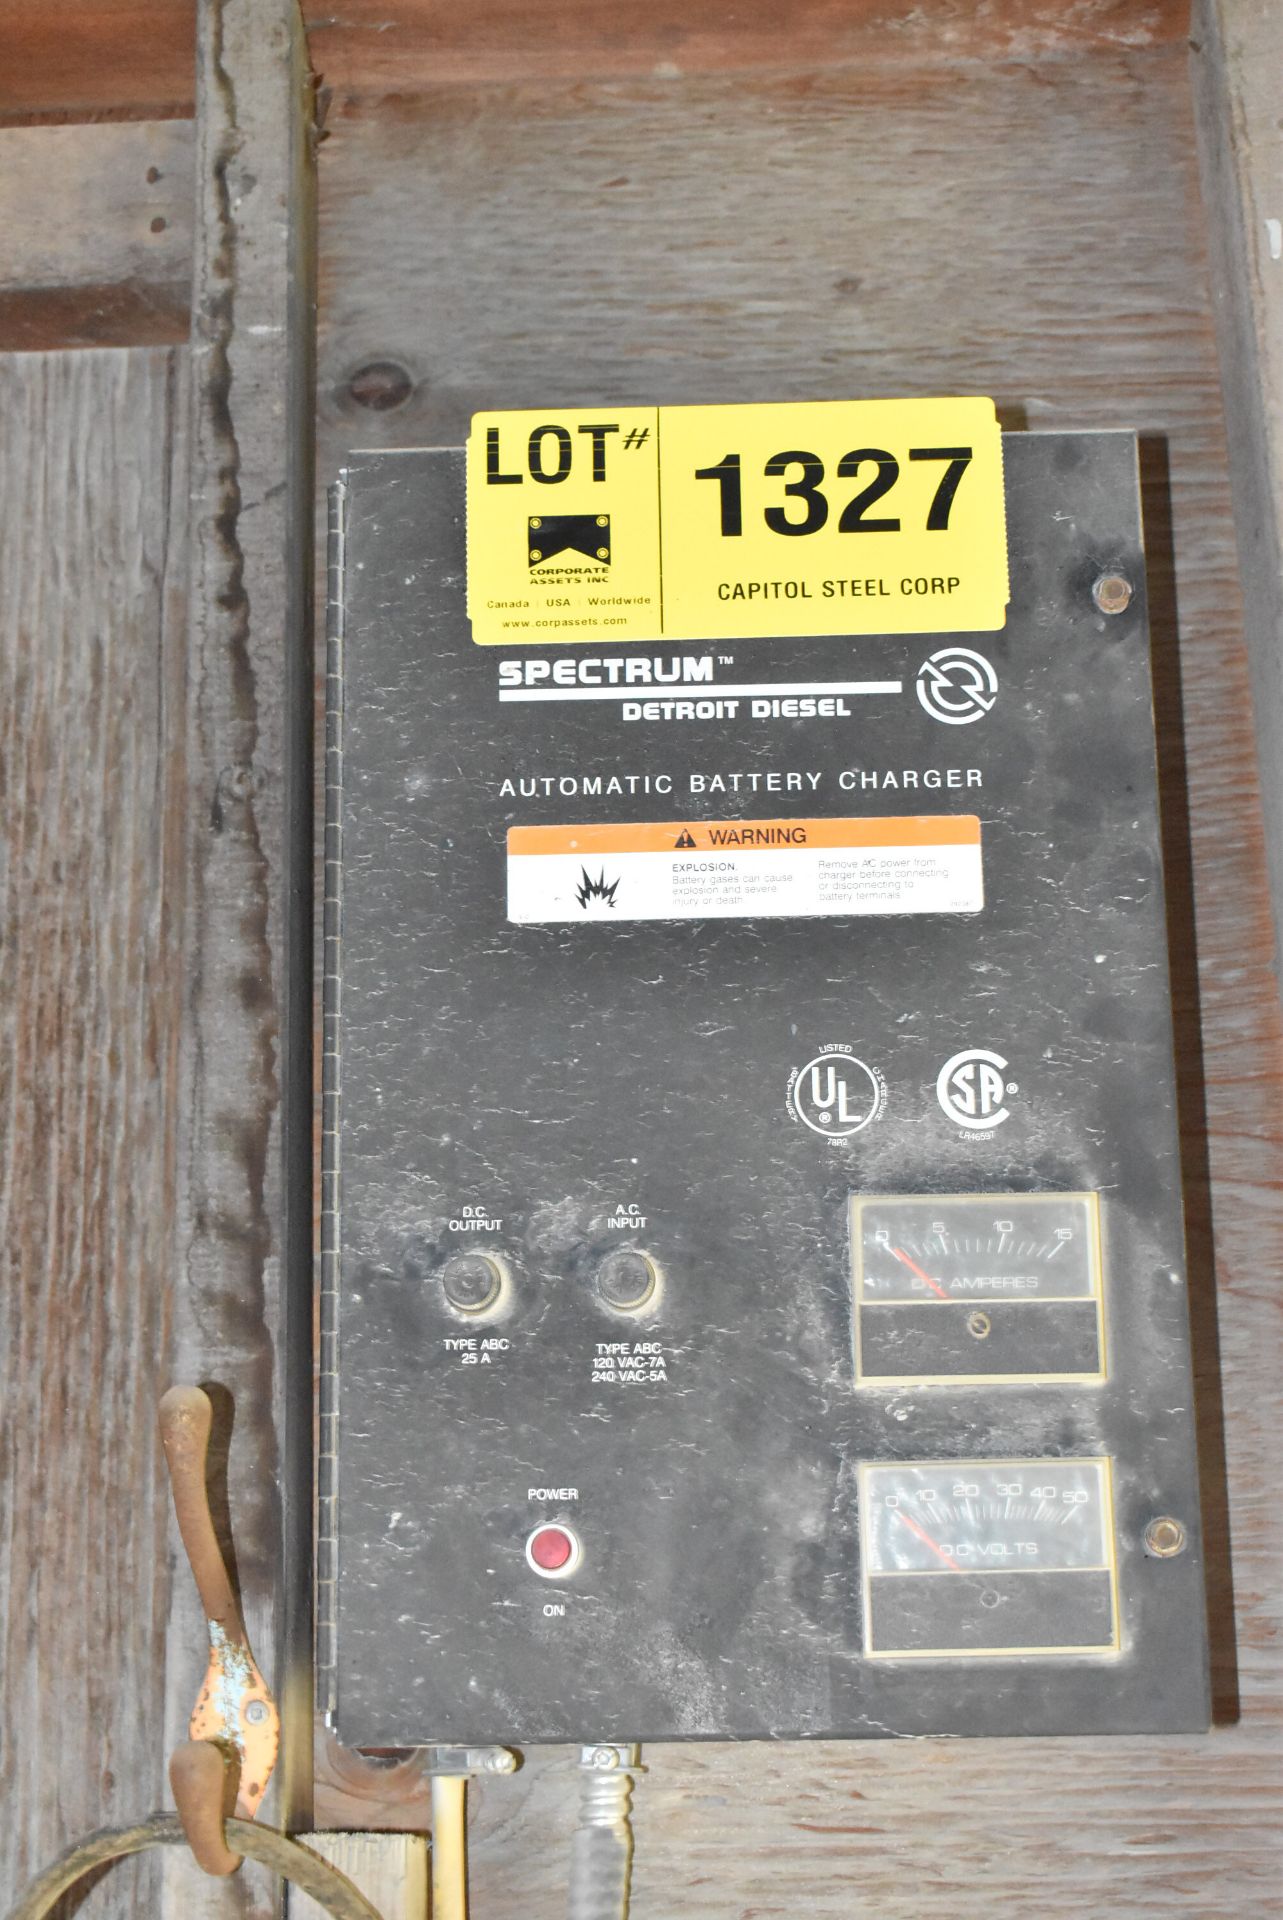 DETROIT DIESEL SPECTRUM AUTOMATIC BATTERY CHARGER (CI) [RIGGING FEES FOR LOT #1327 - $50 USD PLUS